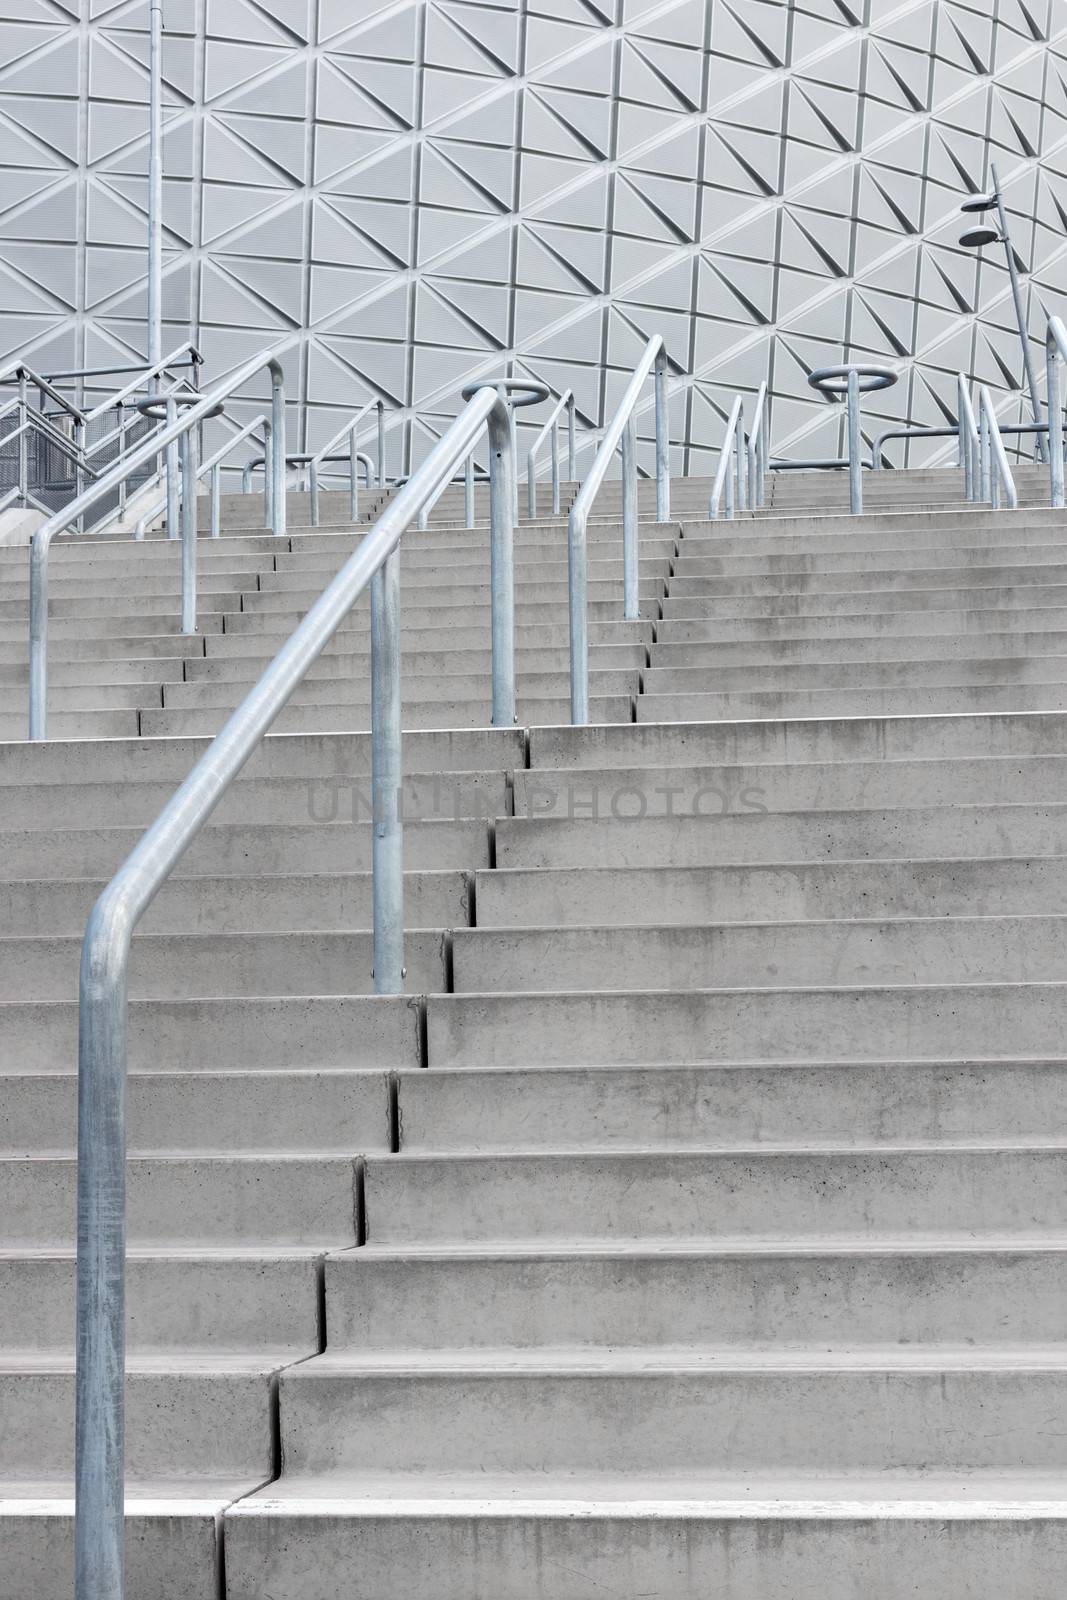 Stairway leading to a modern stadium. Contemporary architecture.